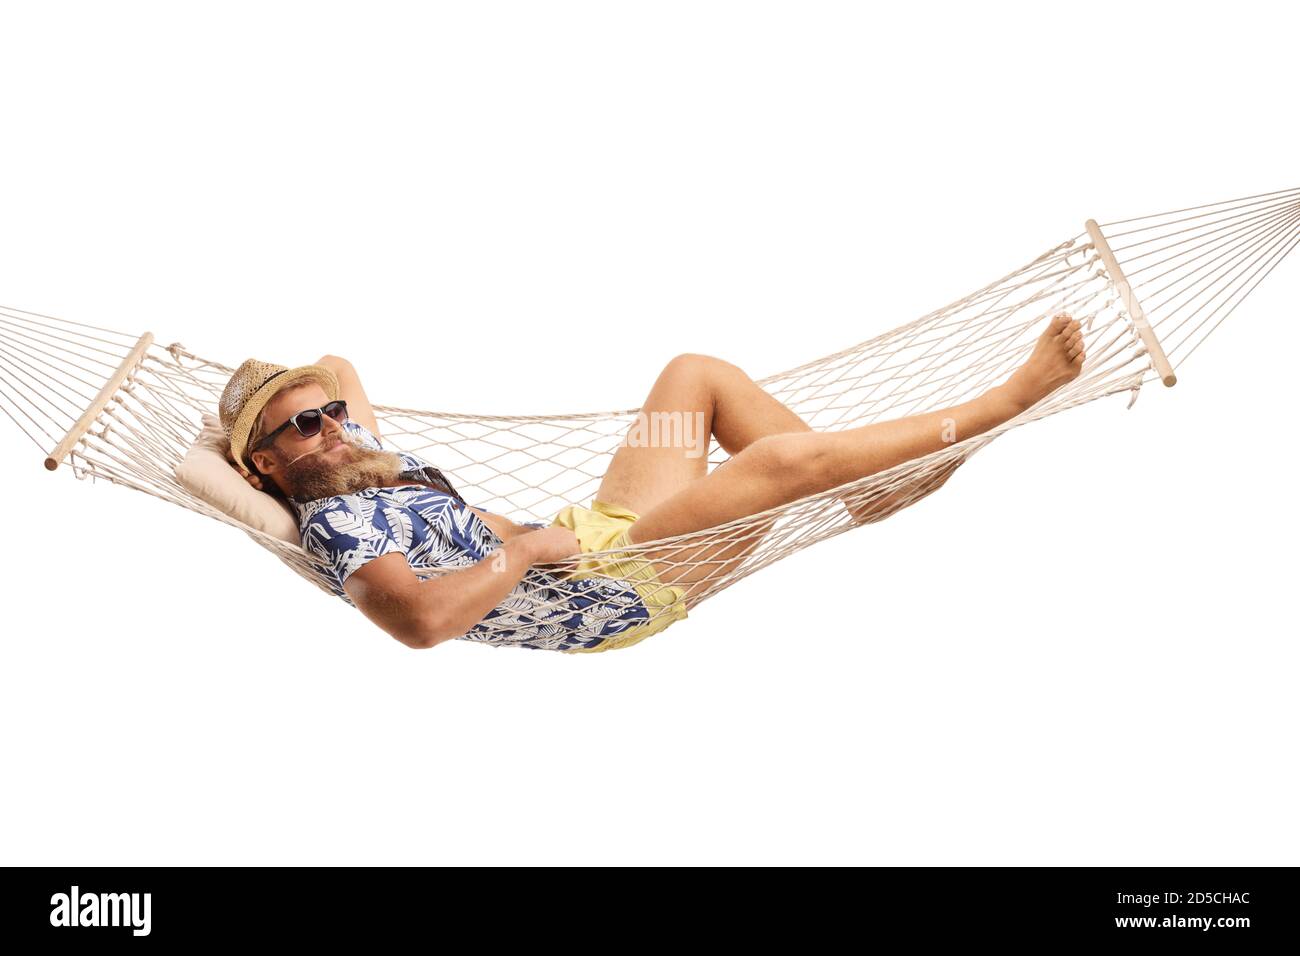 Bearded guy laying in a hammock swing isolated on white background Stock Photo